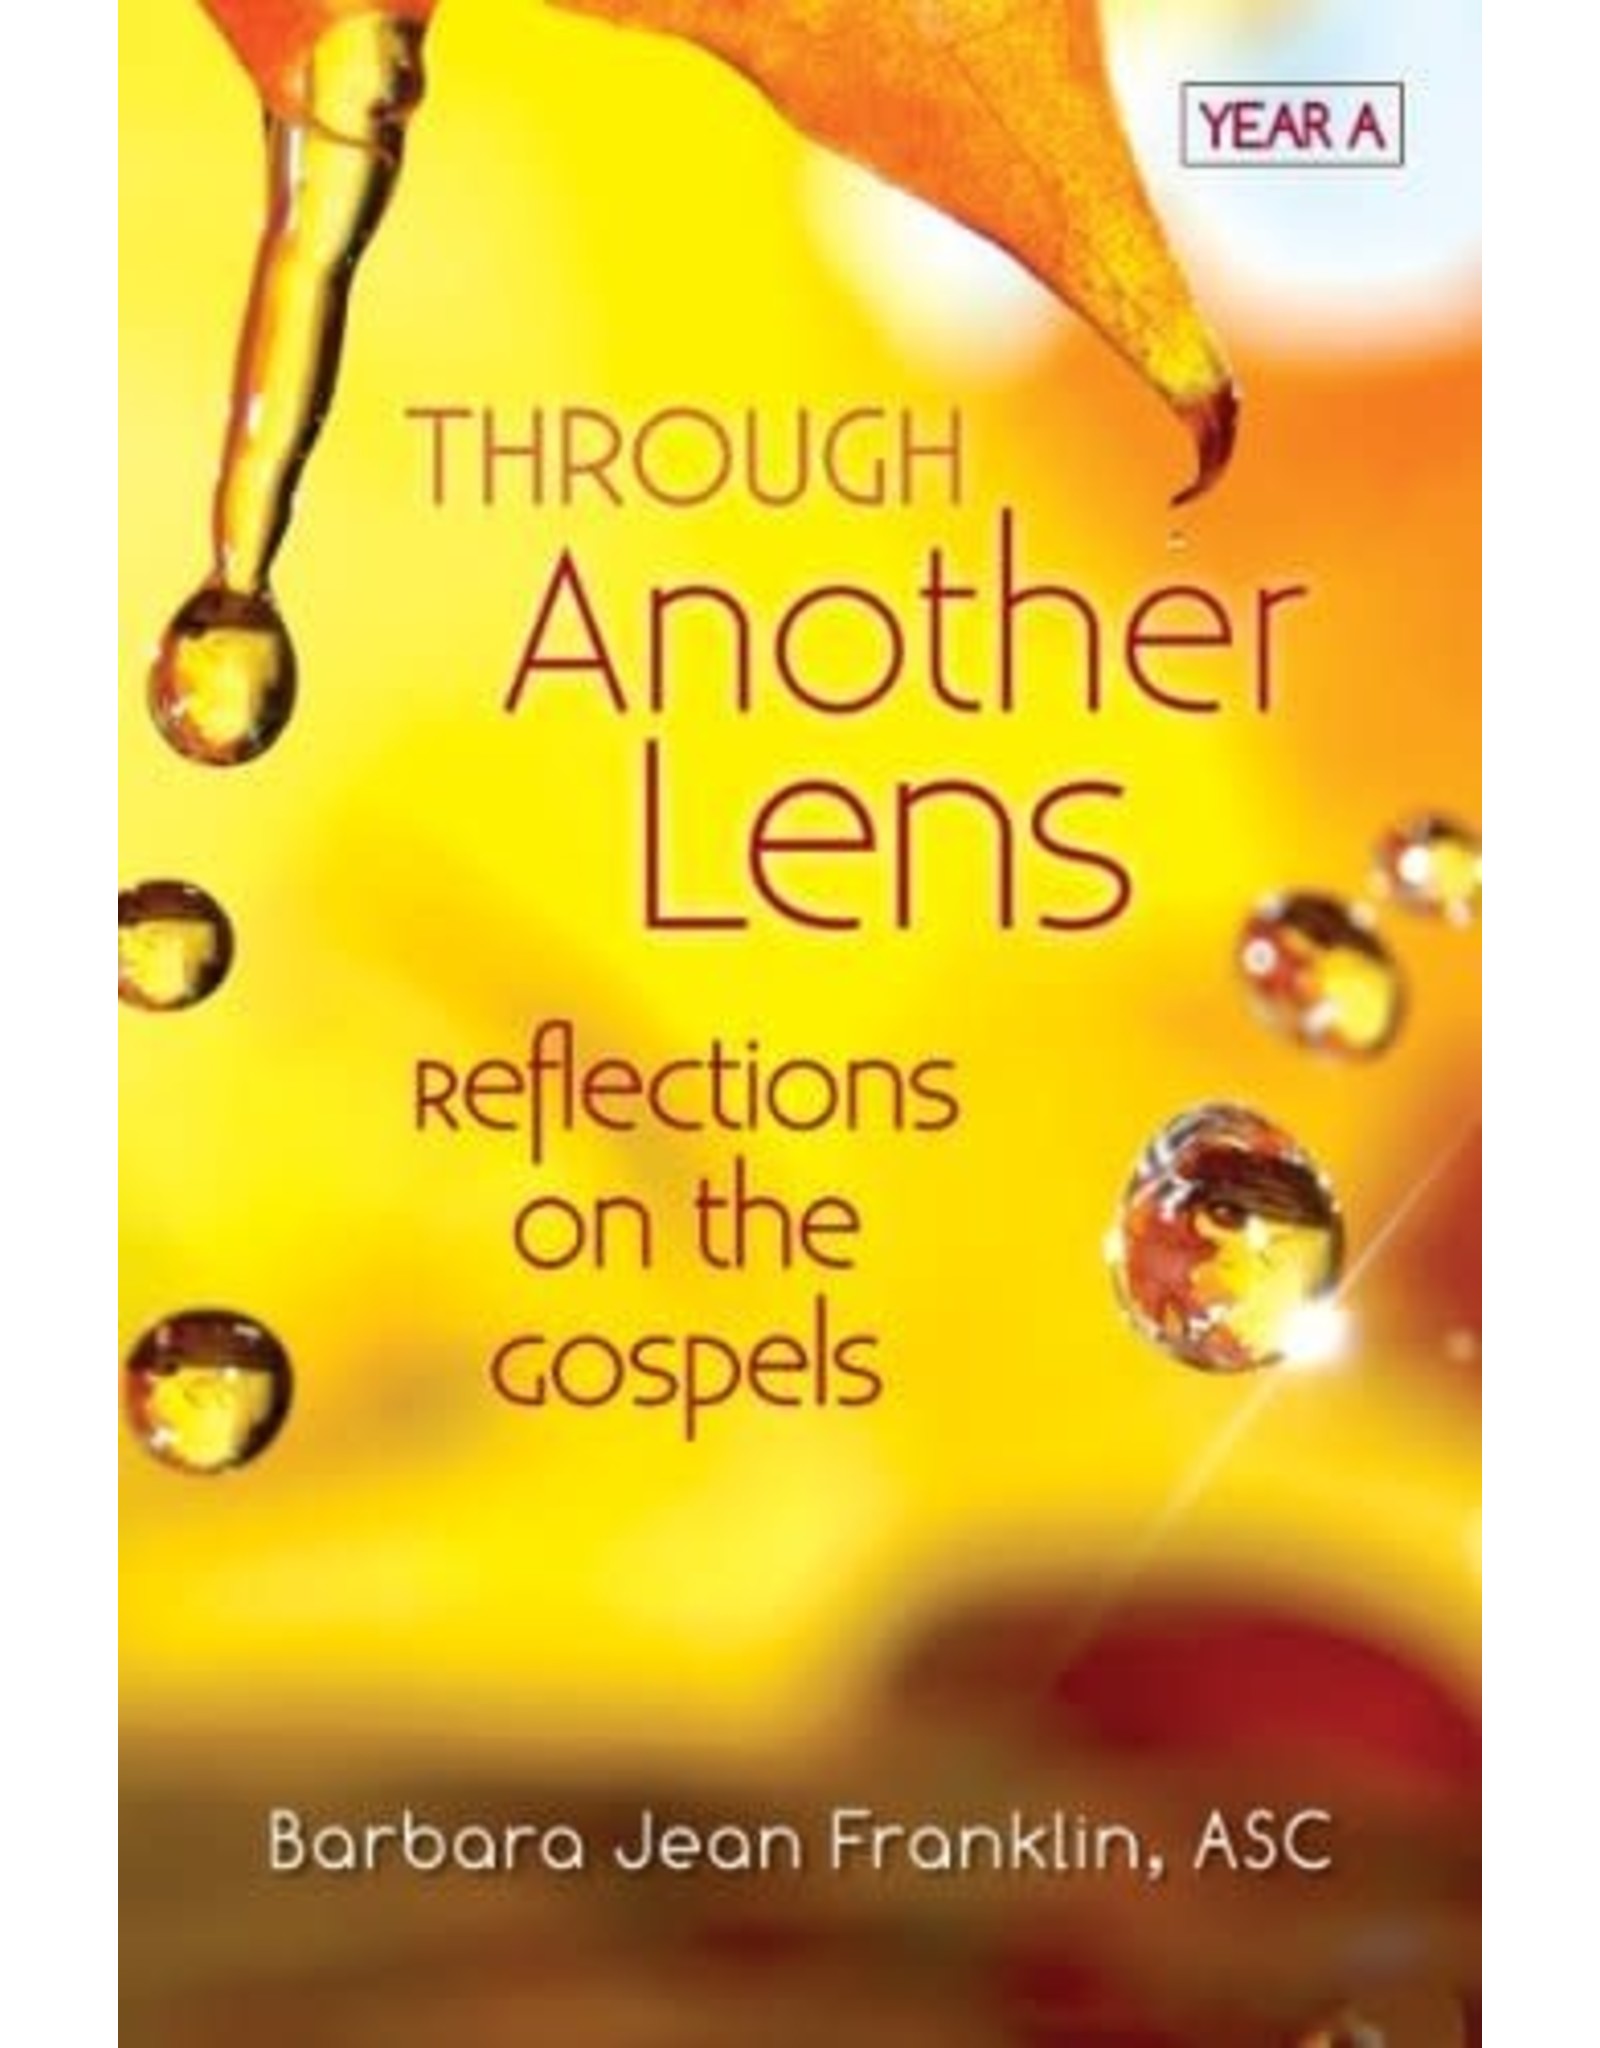 Through Another Lens: Reflections on the Gospels Year A